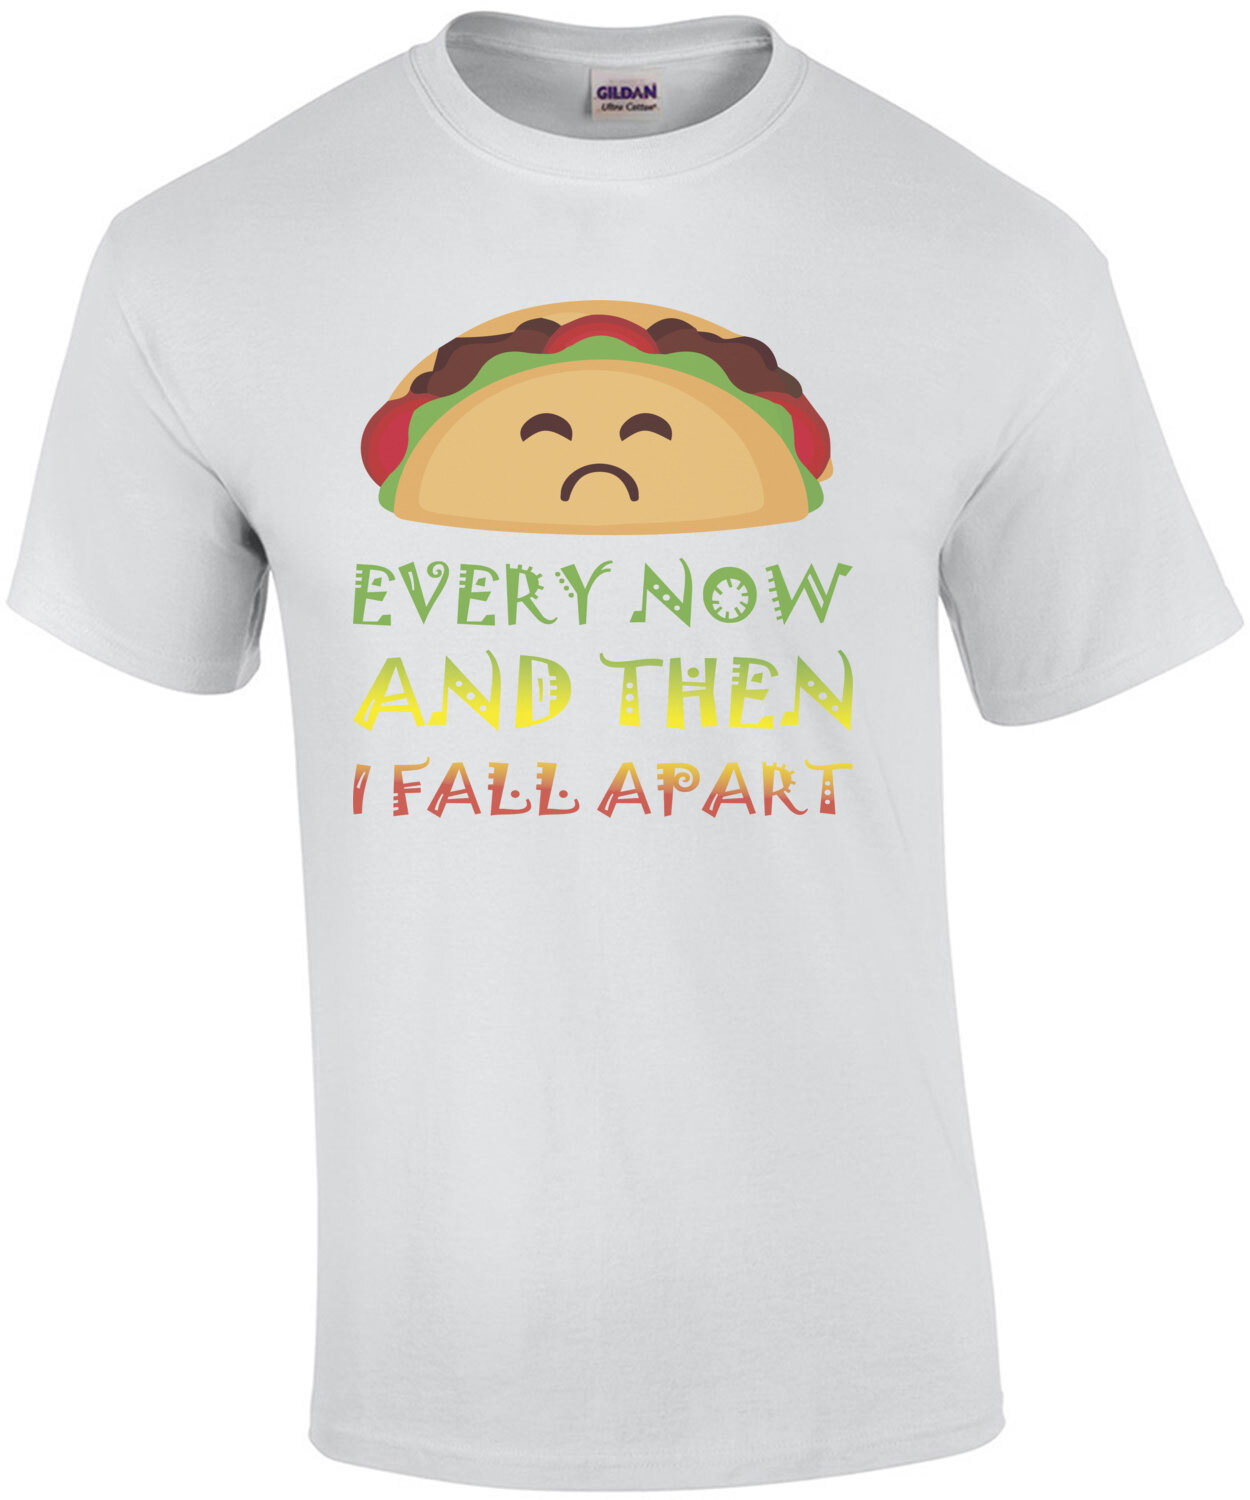 Every now and then I fall apart - funny taco t-shirt